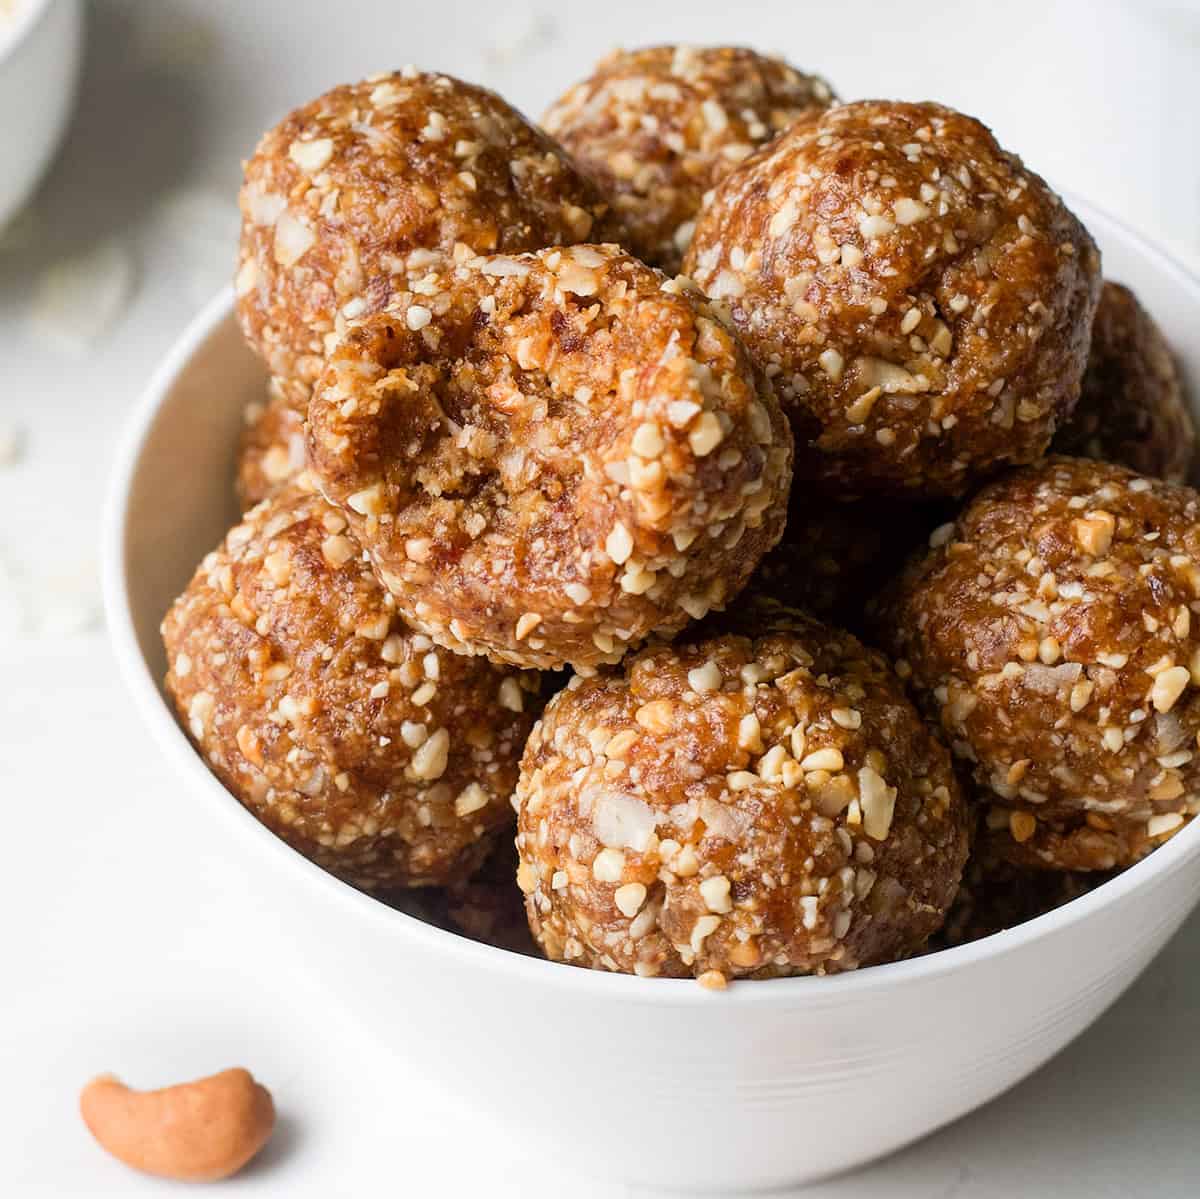 a bowl of coconut date balls, the top one has a bite taken out of it